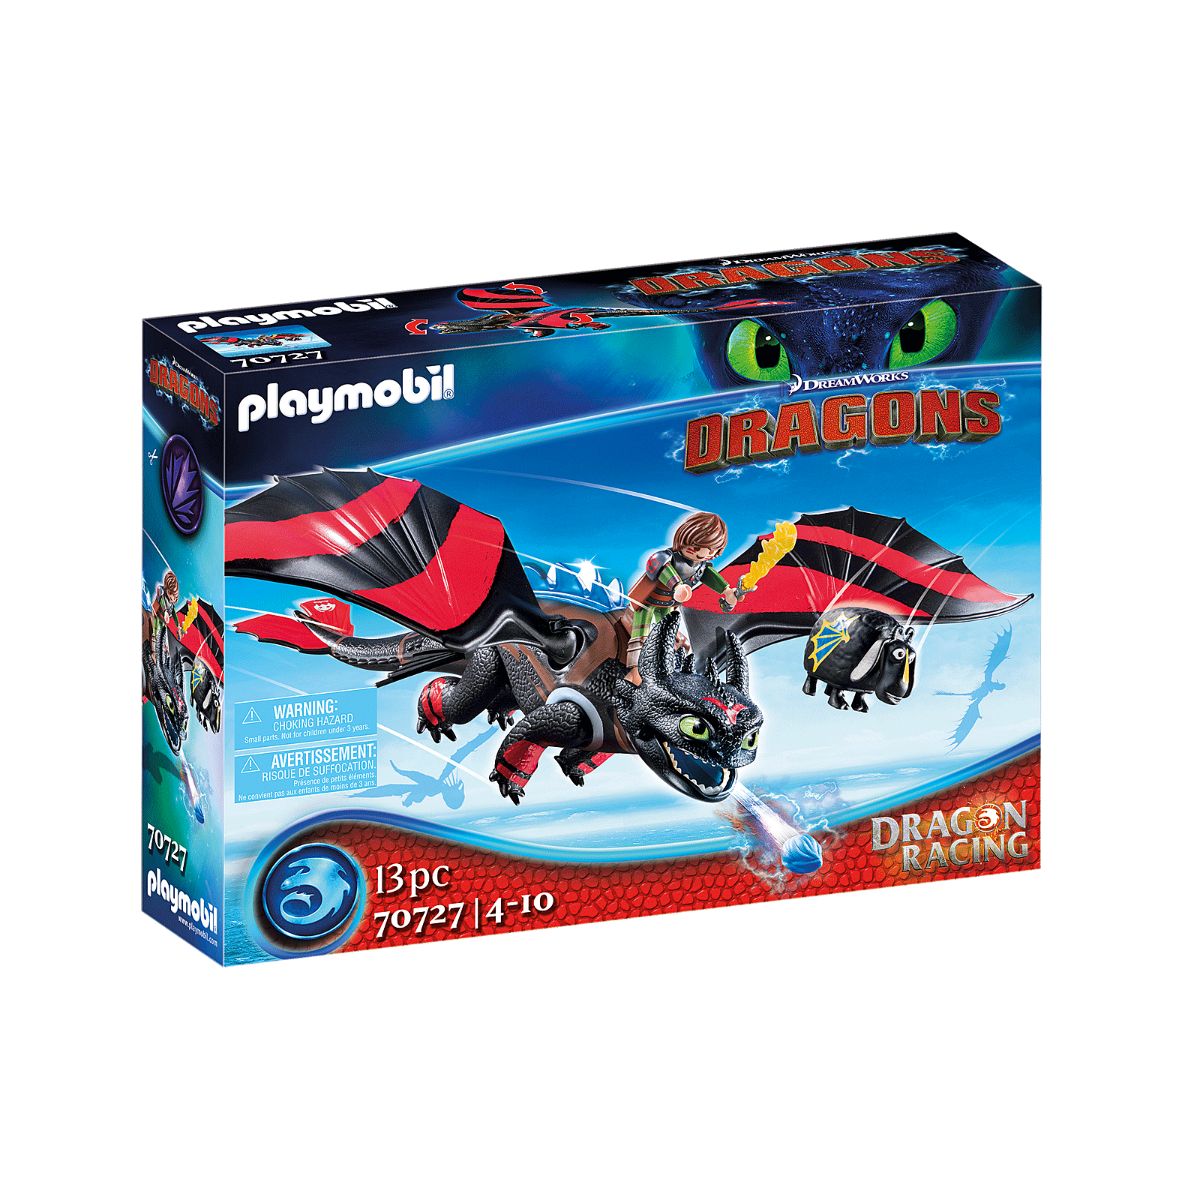 Set Playmobil Dragons – Cursa dragonilor: Hiccup si Toothless noriel.ro imagine 2022